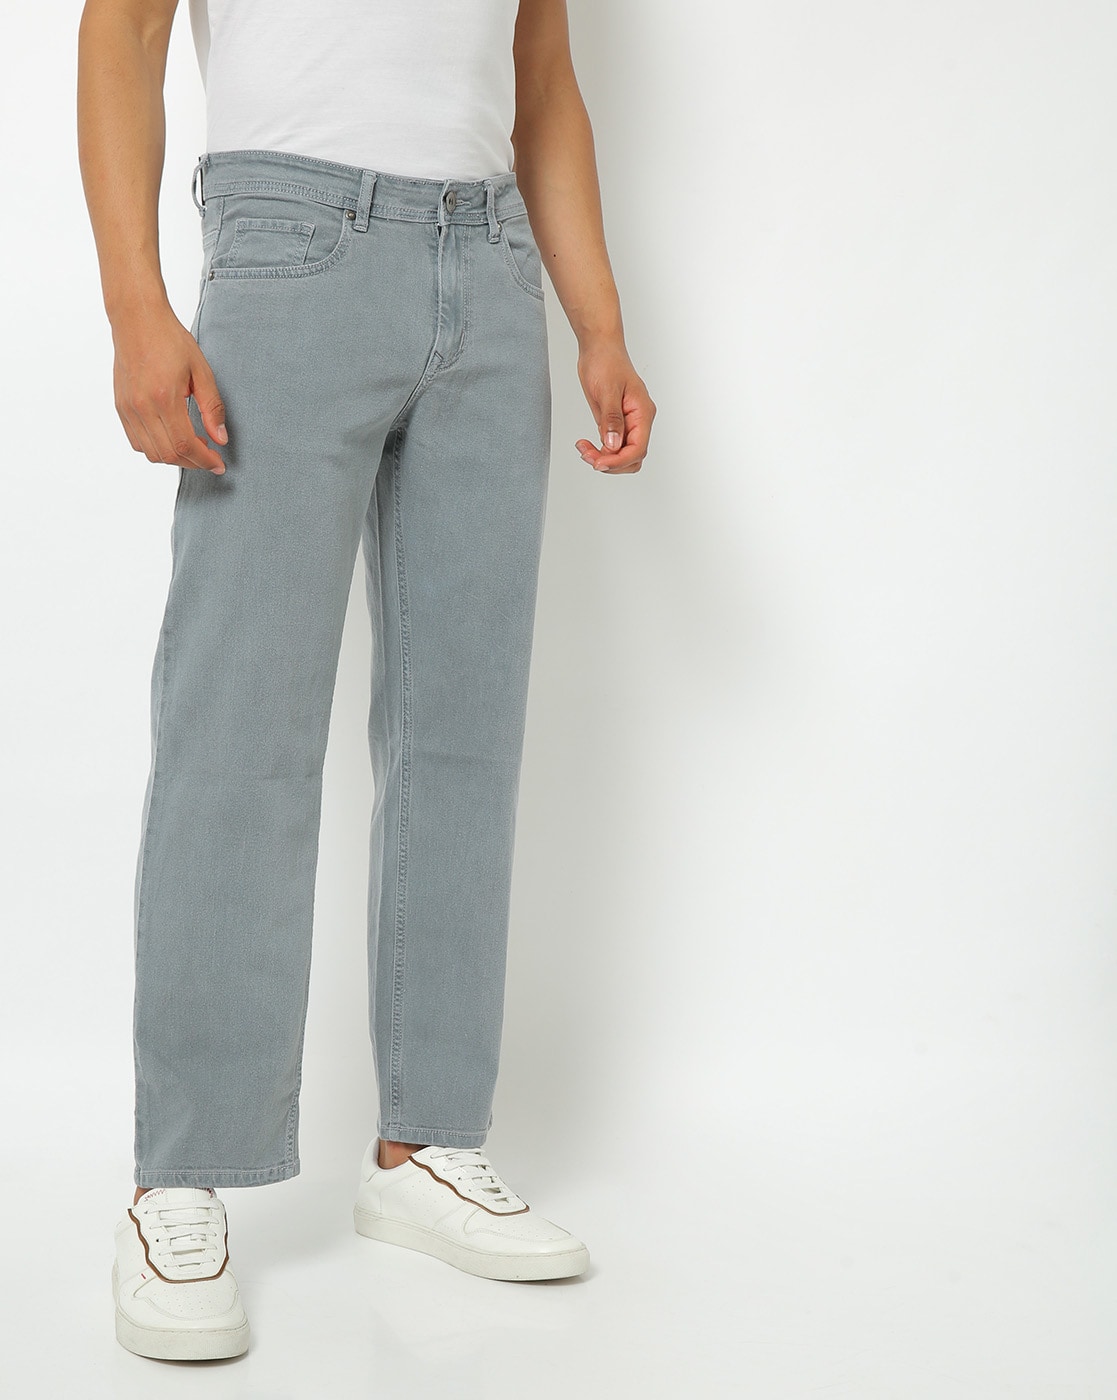 Buy Grey Jeans for Men by High Star Online | Ajio.com